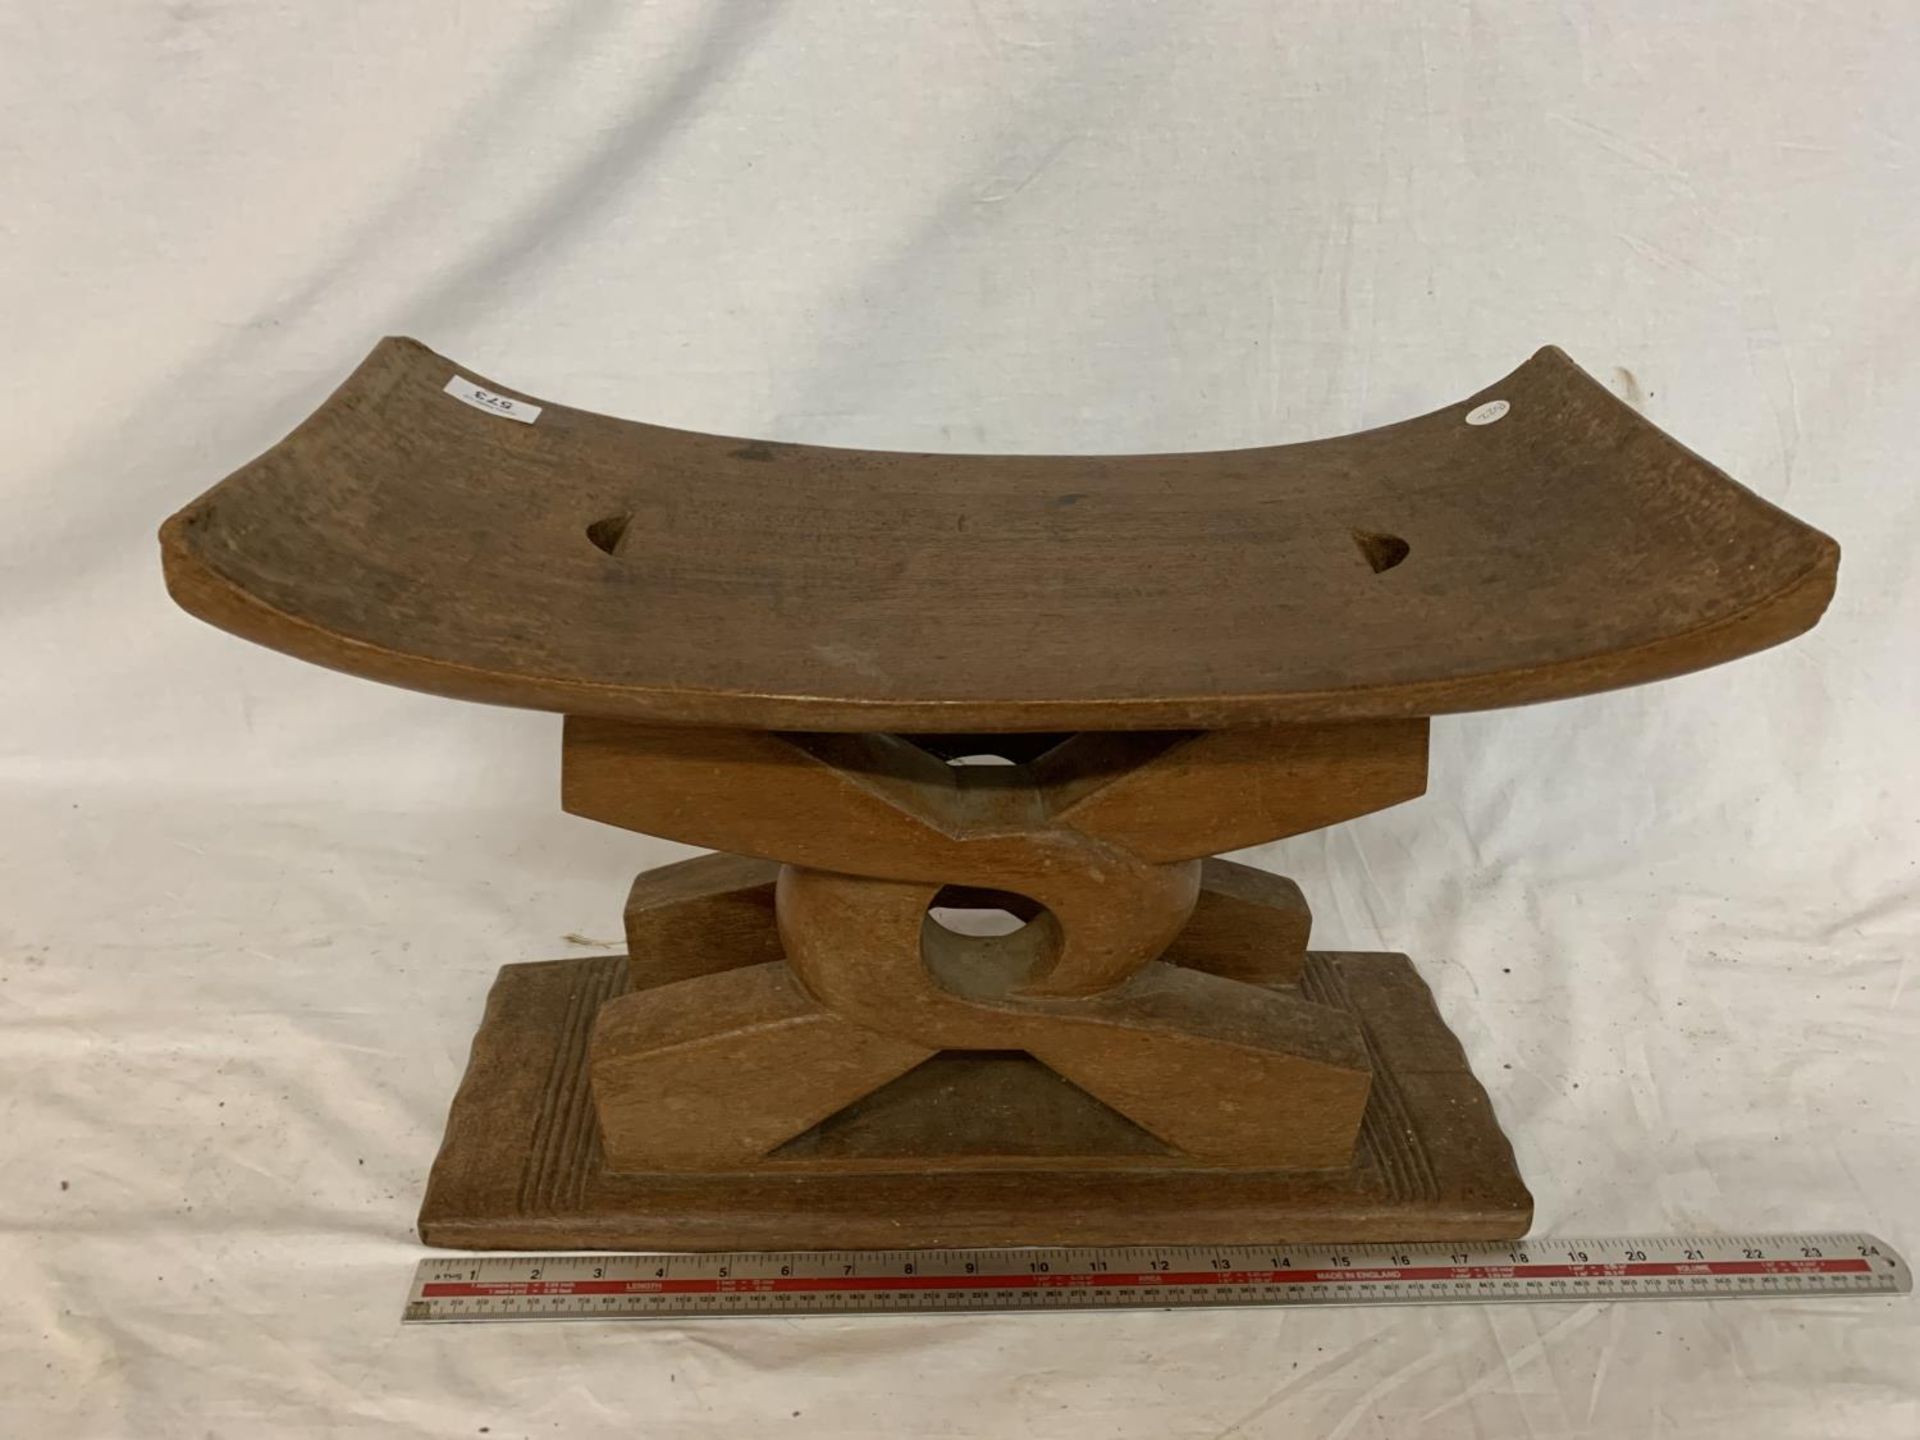 AN ORIENTAL WOODEN STOOL WITH CURVED SEAT - Image 4 of 5